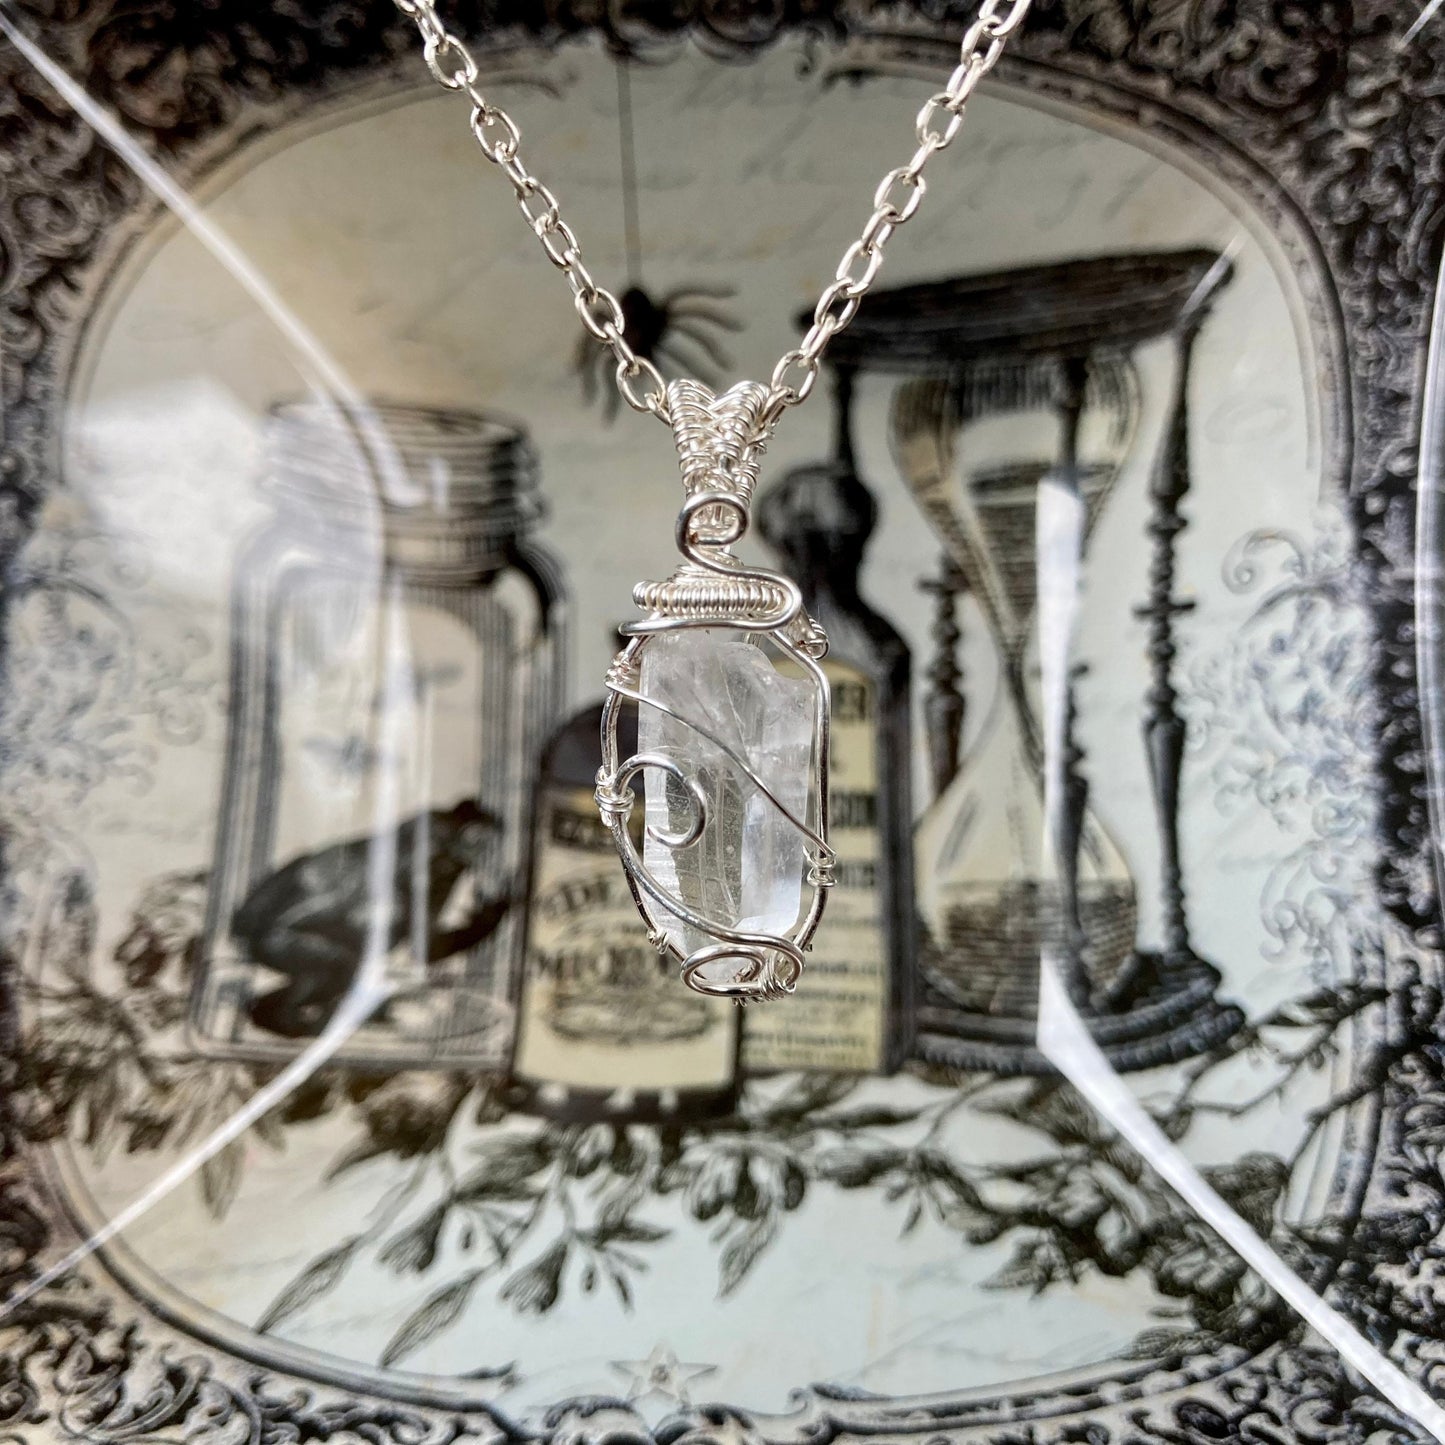 Quartz pendant handmade necklace wire wrapped natural stone with 18 inch length chain